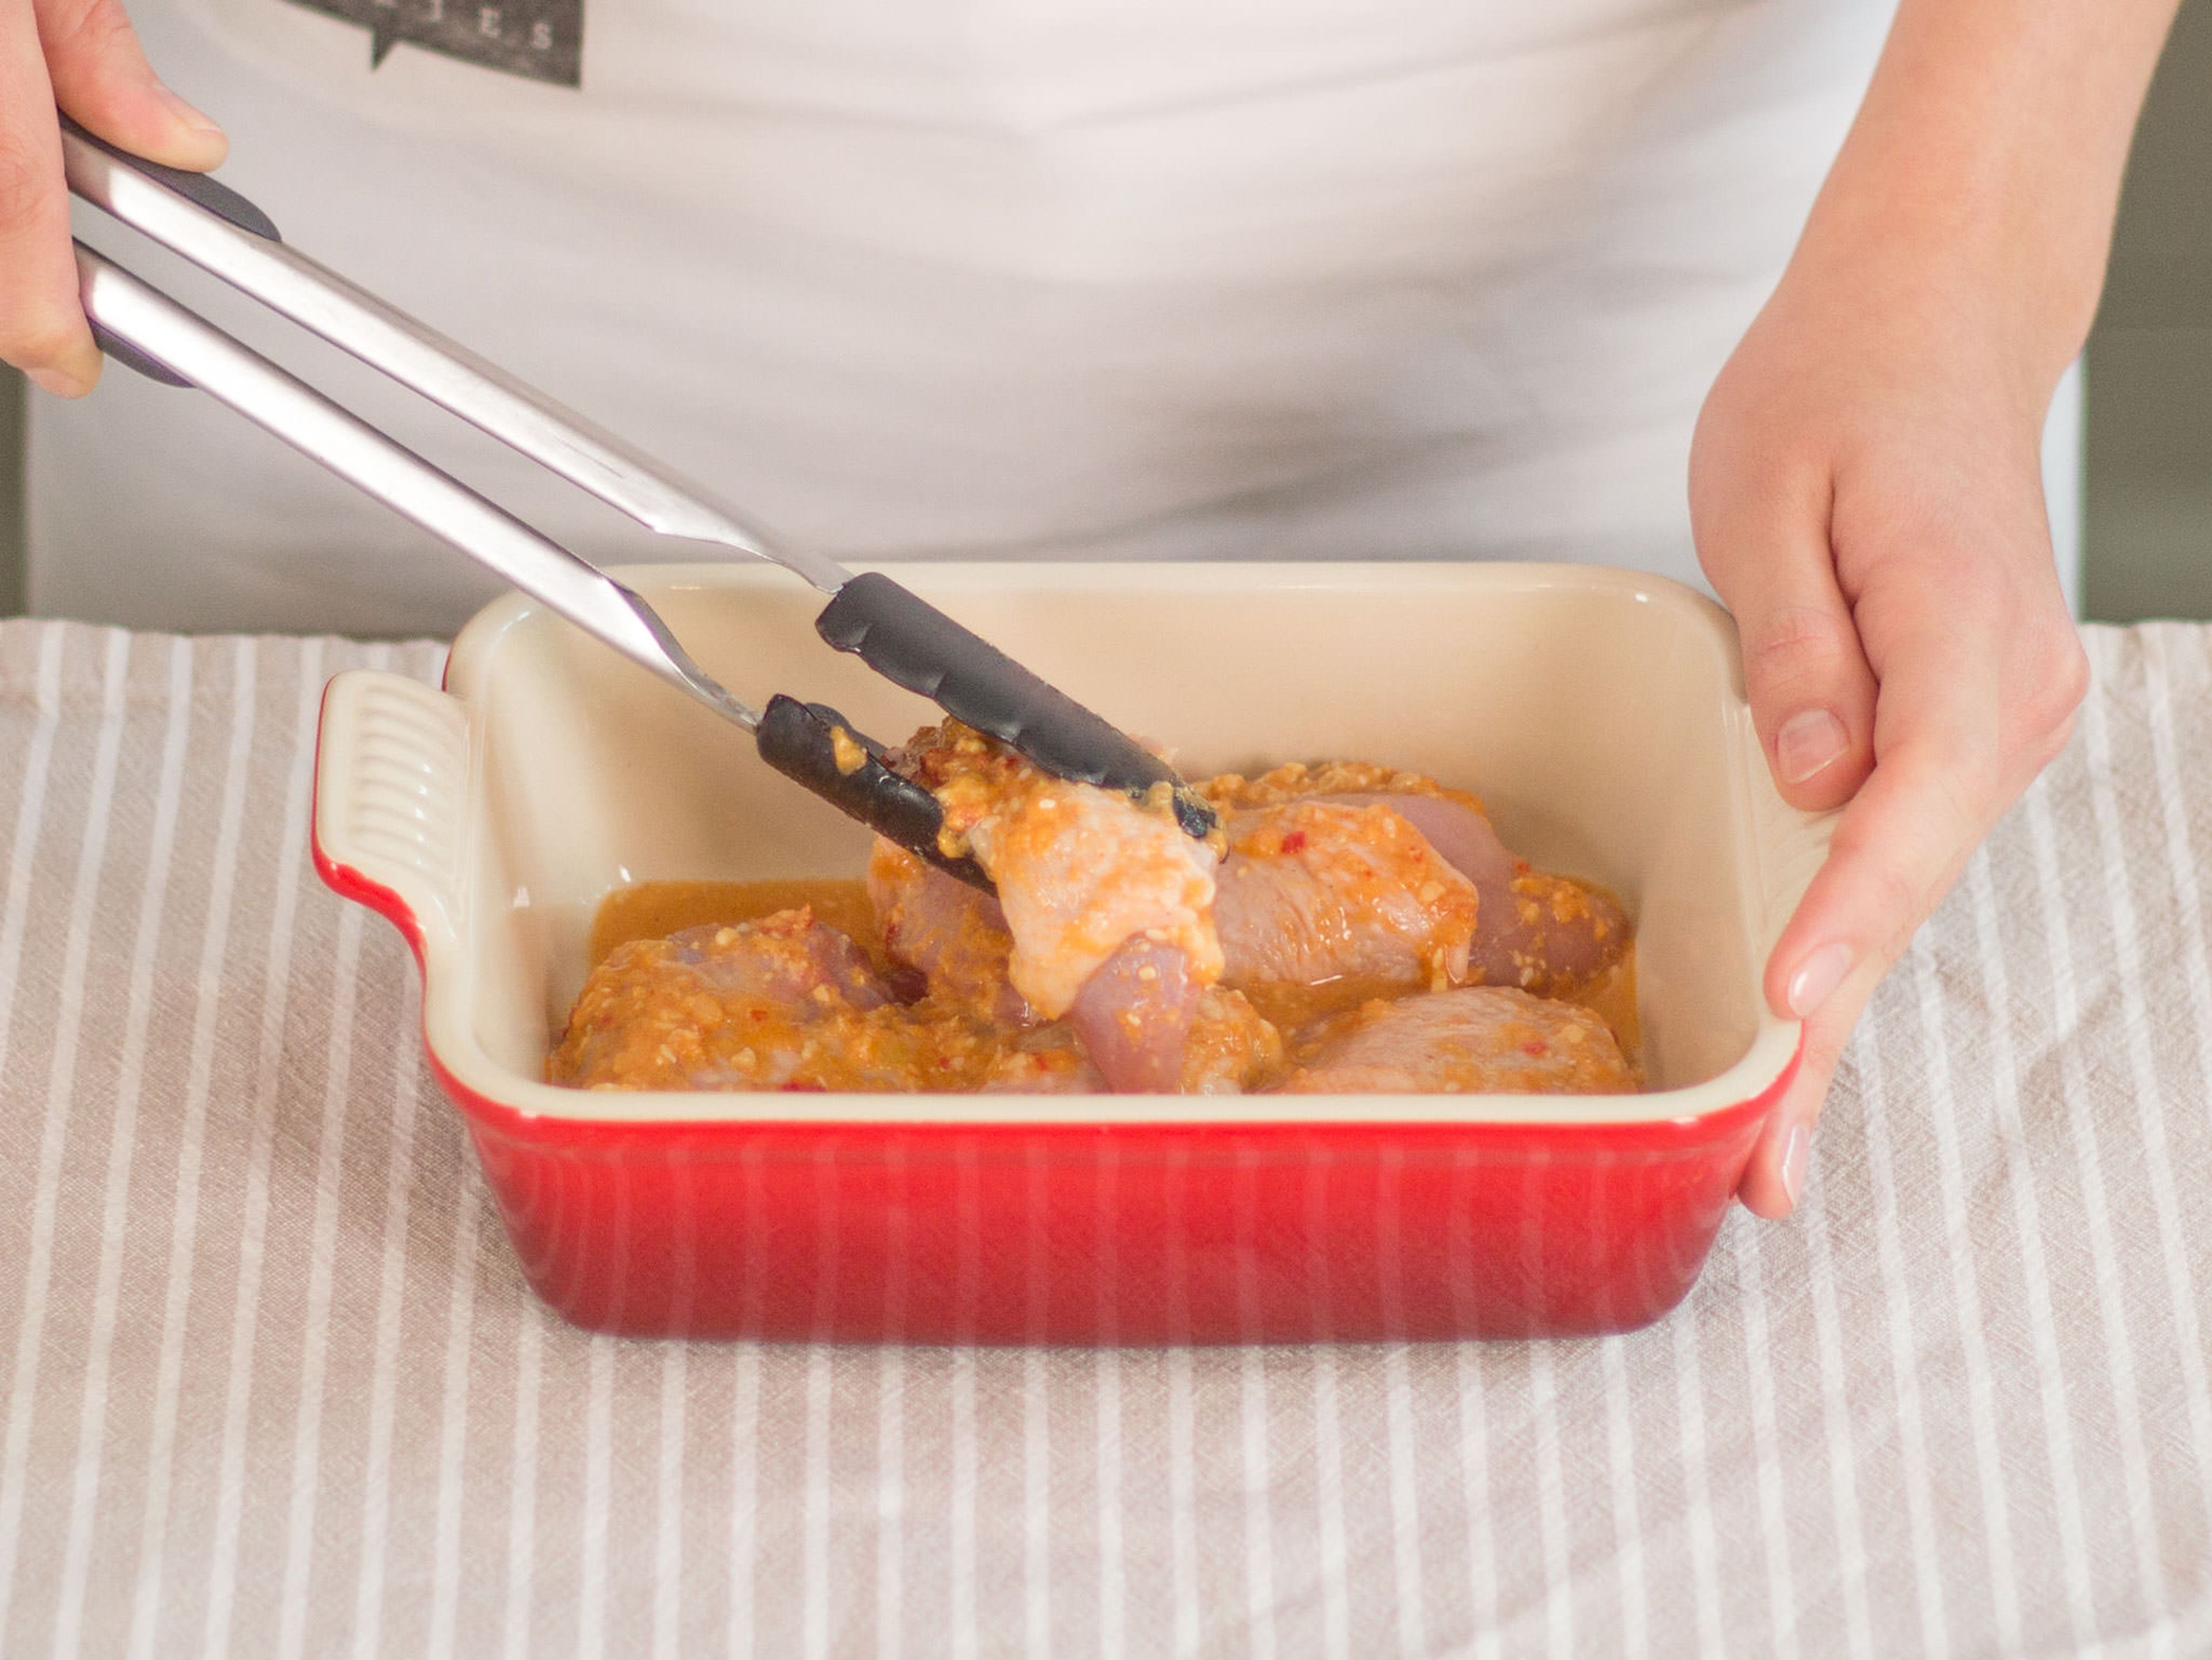 Place chicken in a baking dish and cover with sauce. In the preheated oven, bake at 180°C/350°F for approx. 20 – 25  min. Then, increase heat to 220°C/430°F and bake for approx. another 10 – 12 min.